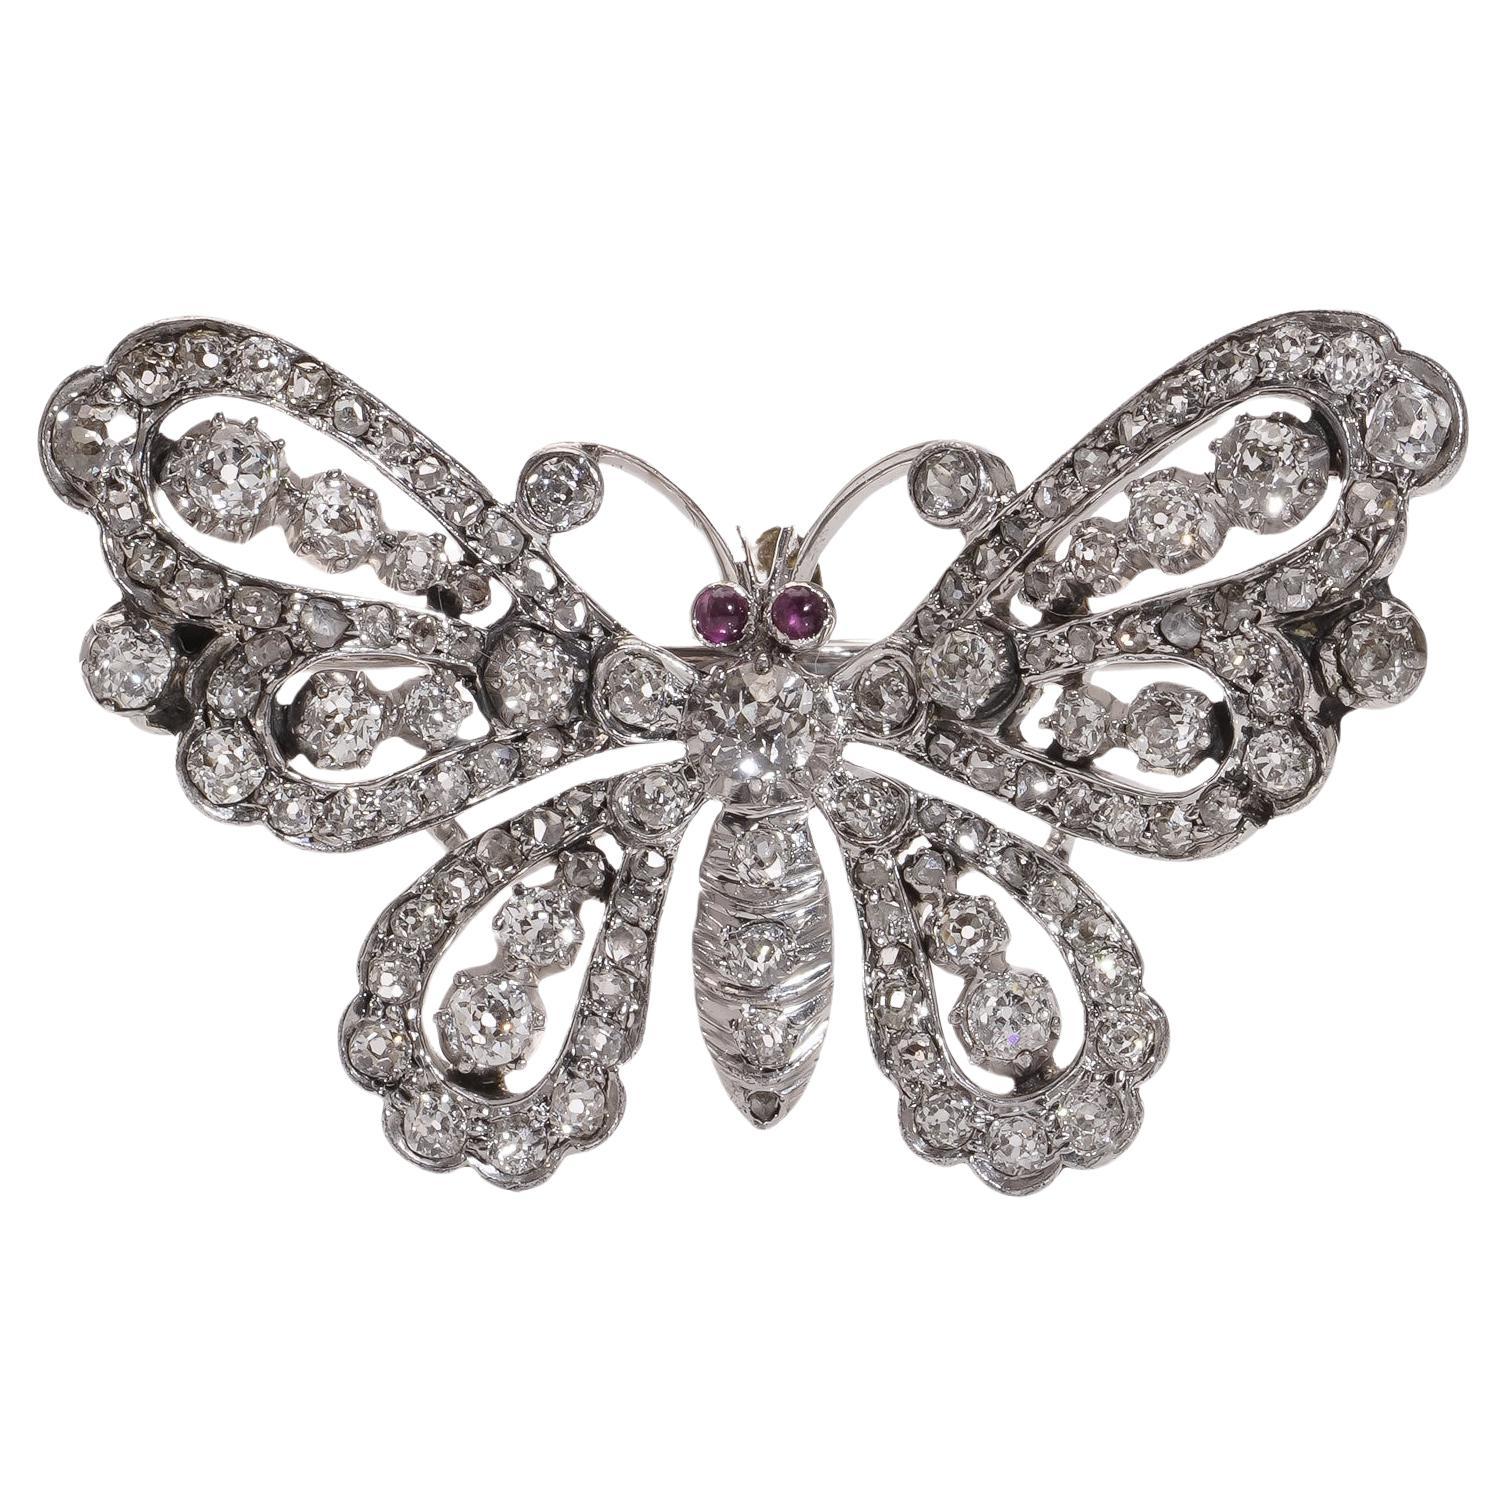 Victorian 9kt gold and silver butterfly brooch with old cut diamonds rubies